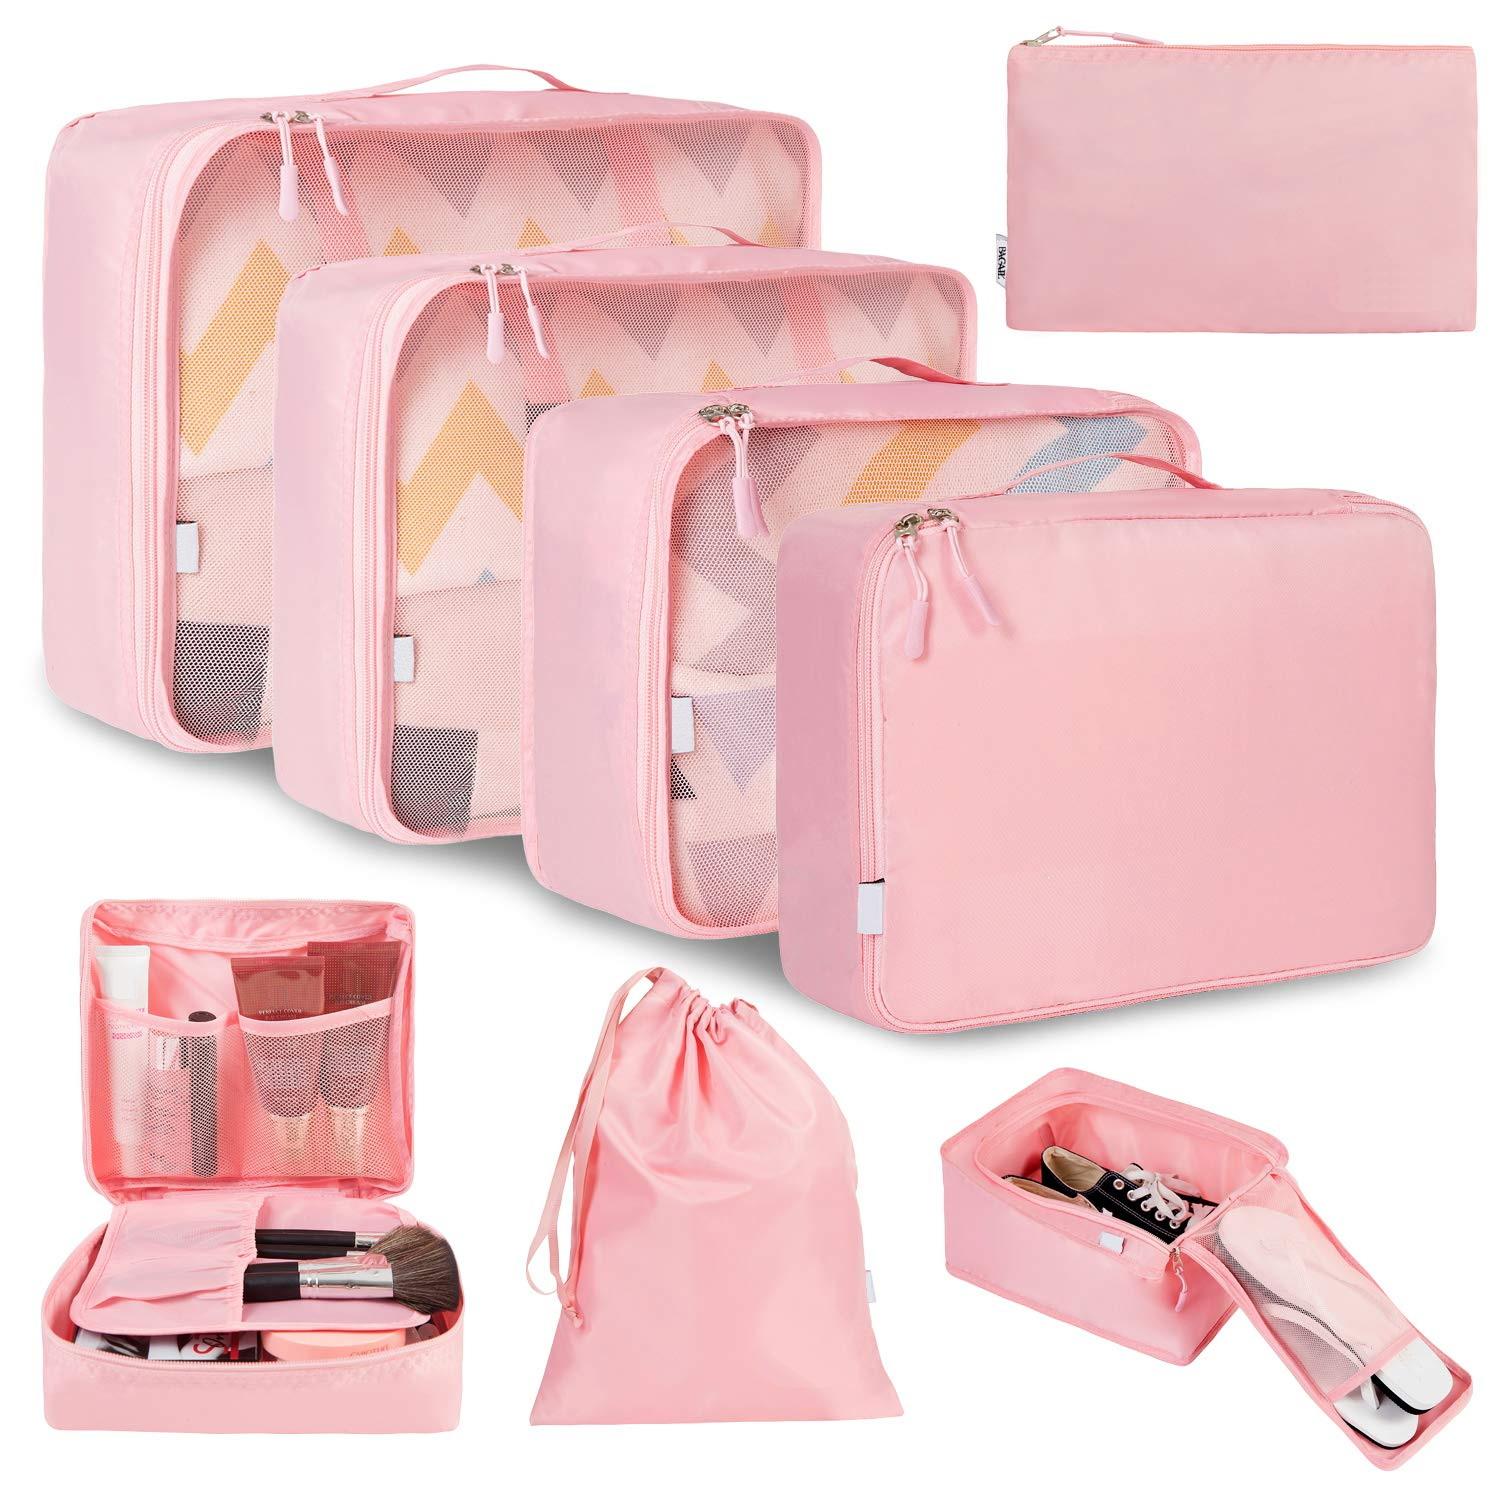 WellPromotion Suitcase Organizer Bags